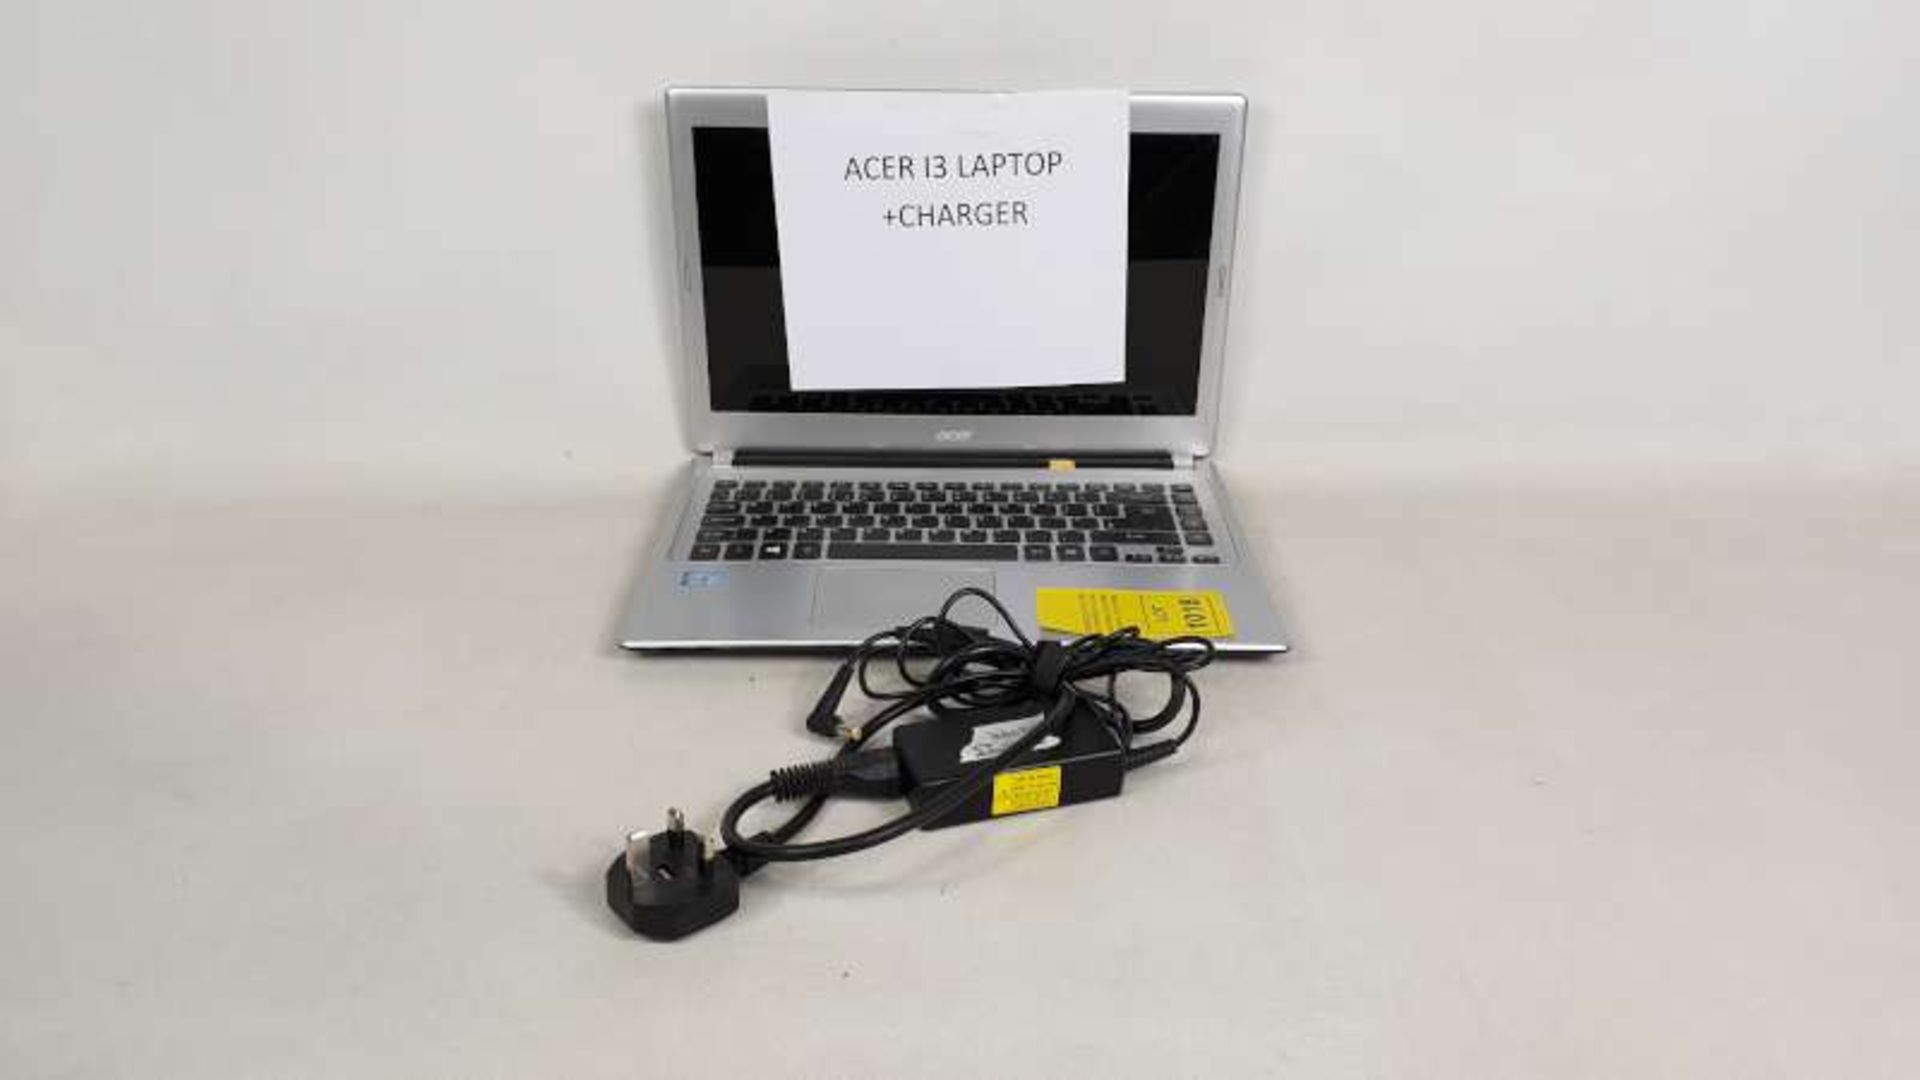 ACER LAPTOP WITH CHARGER